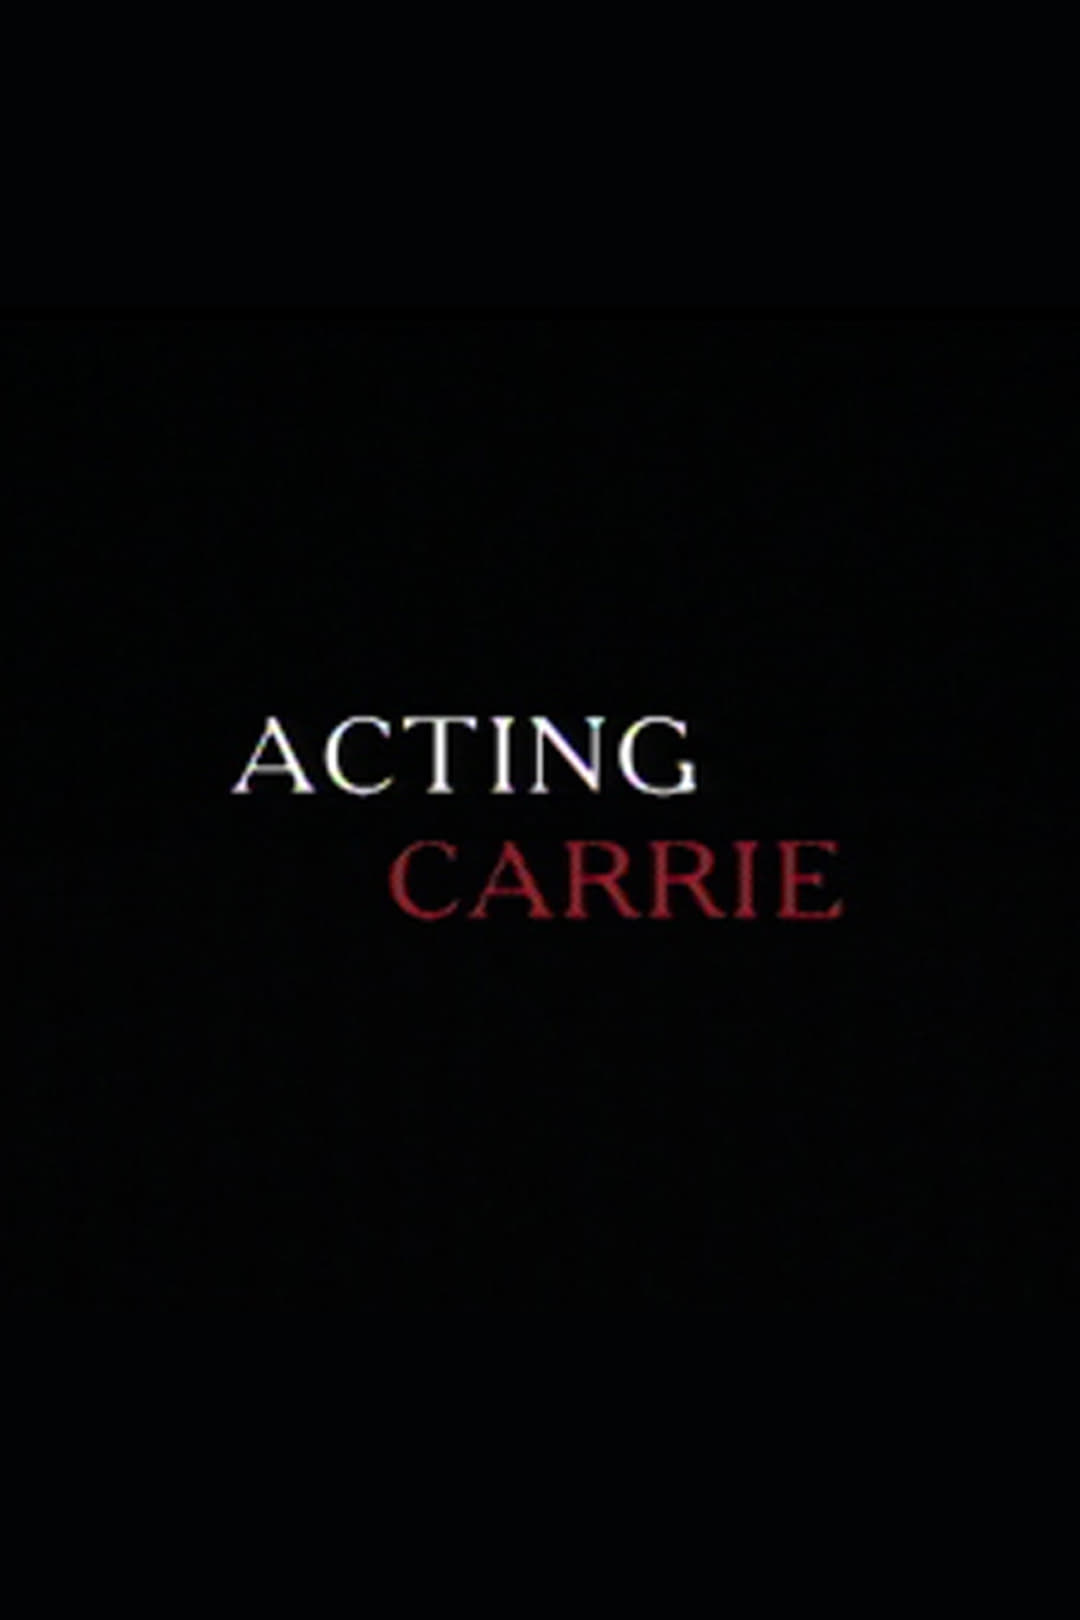 Acting 'Carrie'